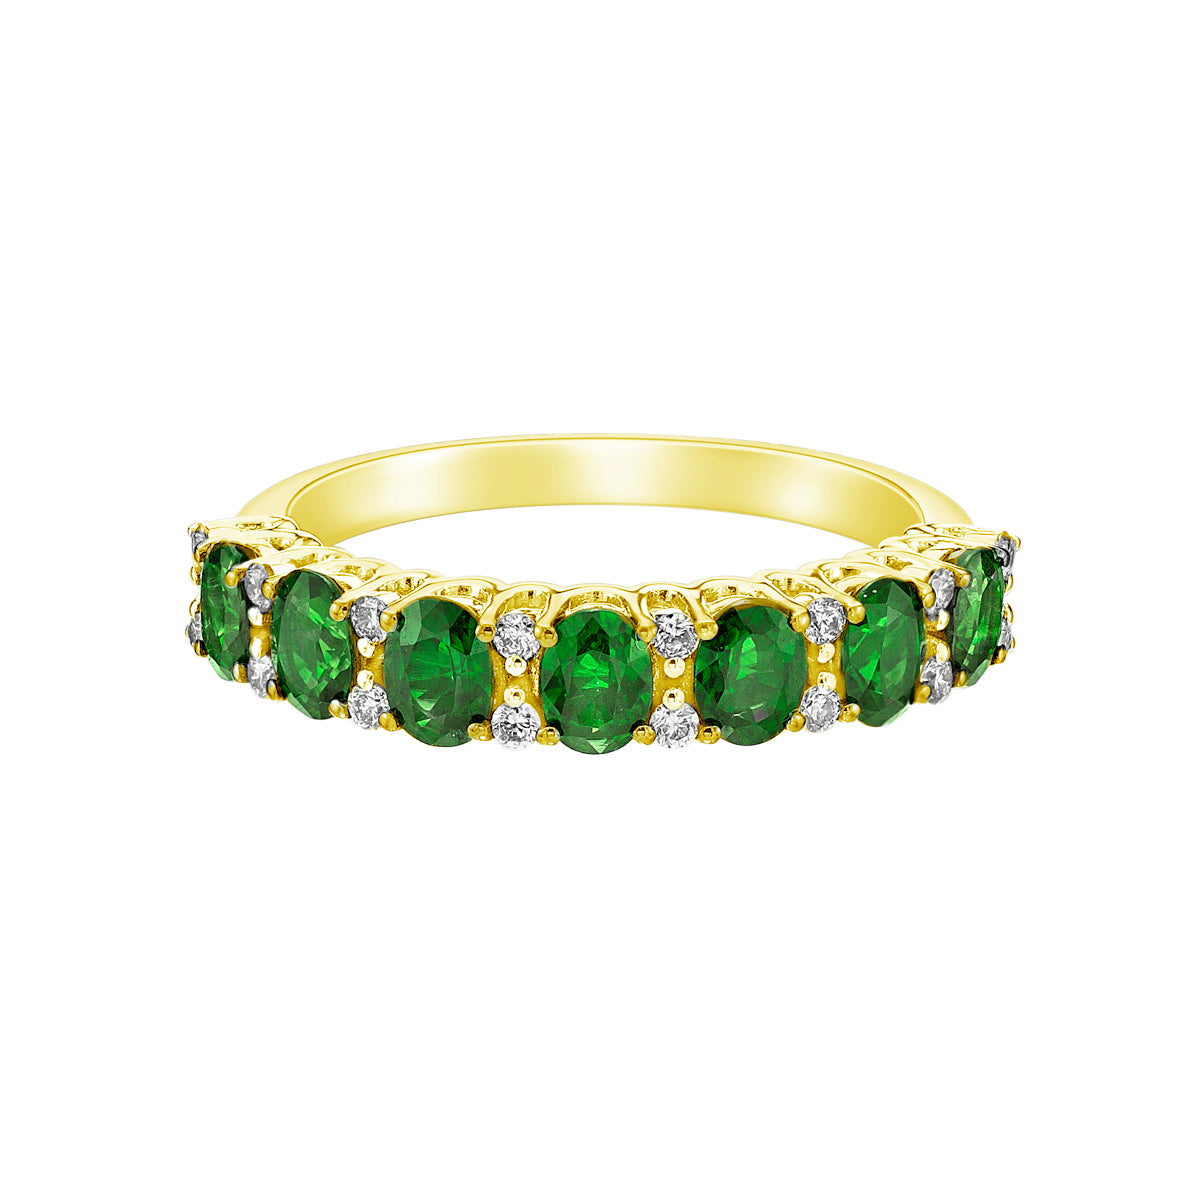 14K Yellow Gold Prong-set Emerald Ring with Diamonds